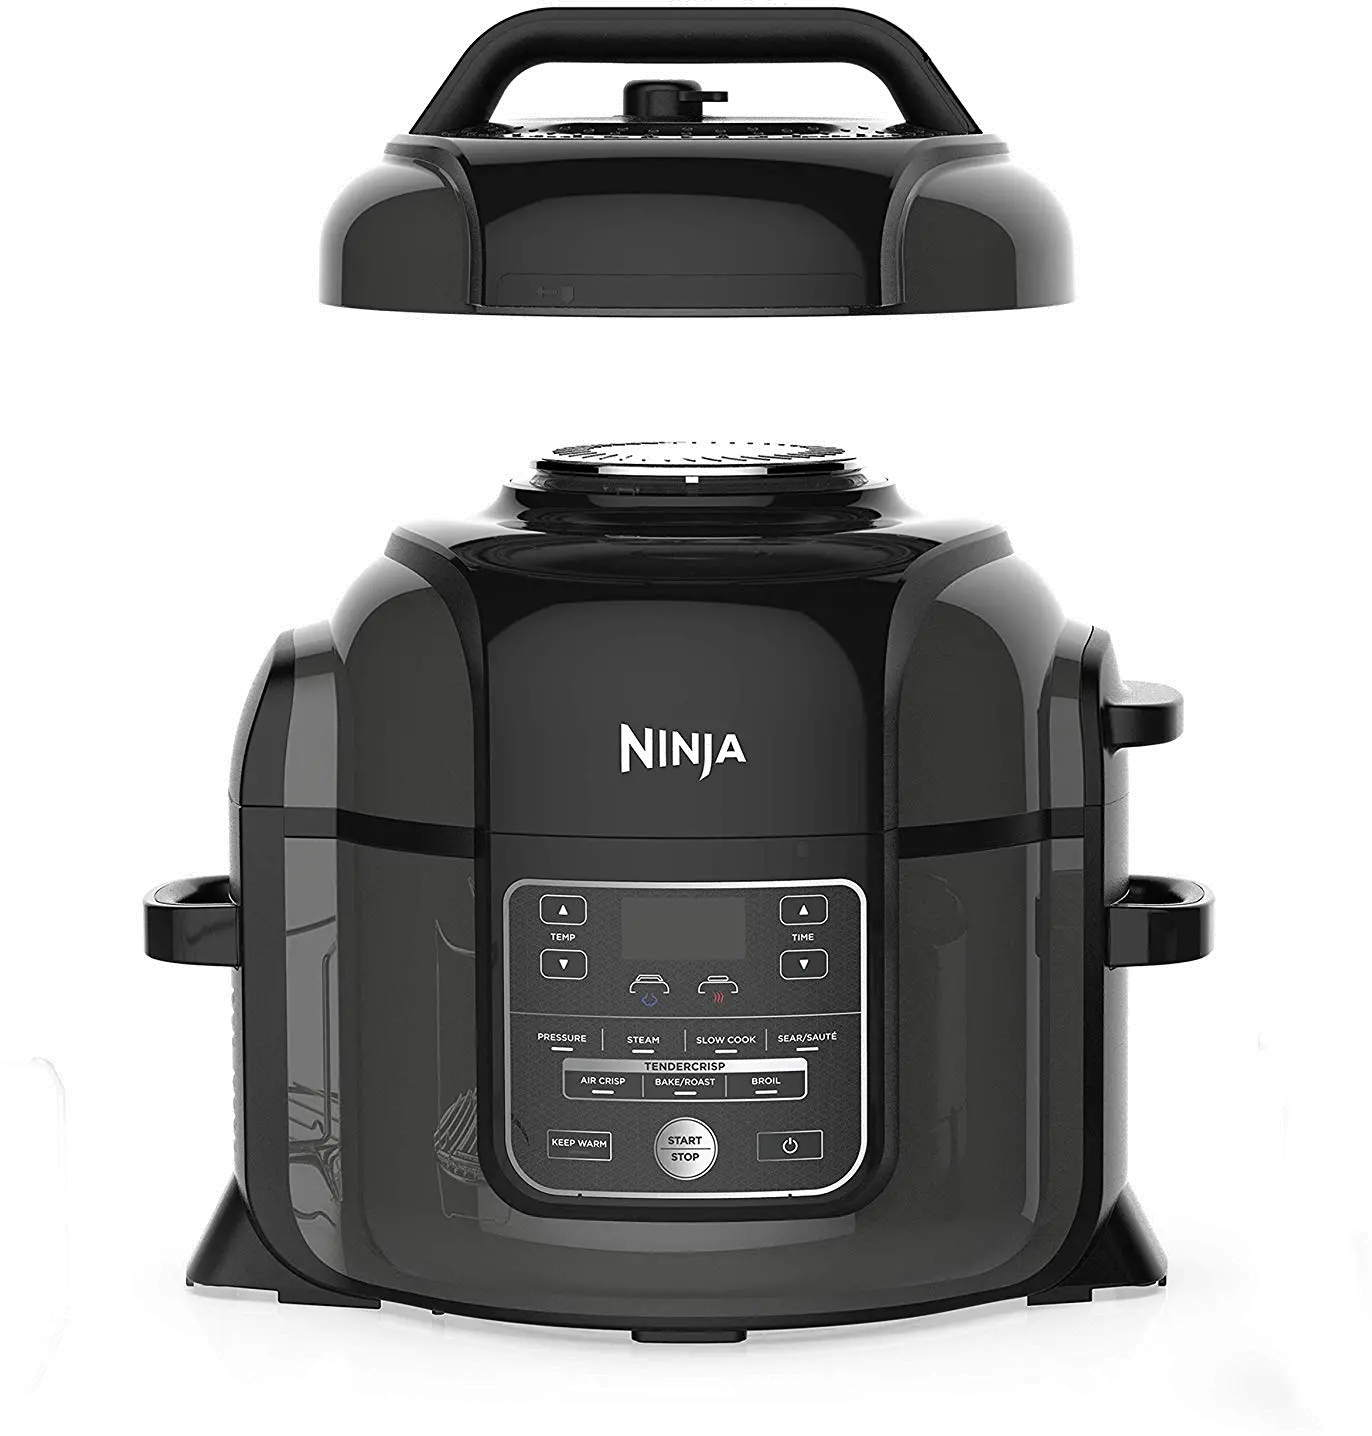 Ninja Foodi 5-in-1 Indoor Grill with 4-Quart Air Fryer with Roast, Bake,  Dehydrate, and Cyclonic Grilling Technology, IG301A - Sam's Club